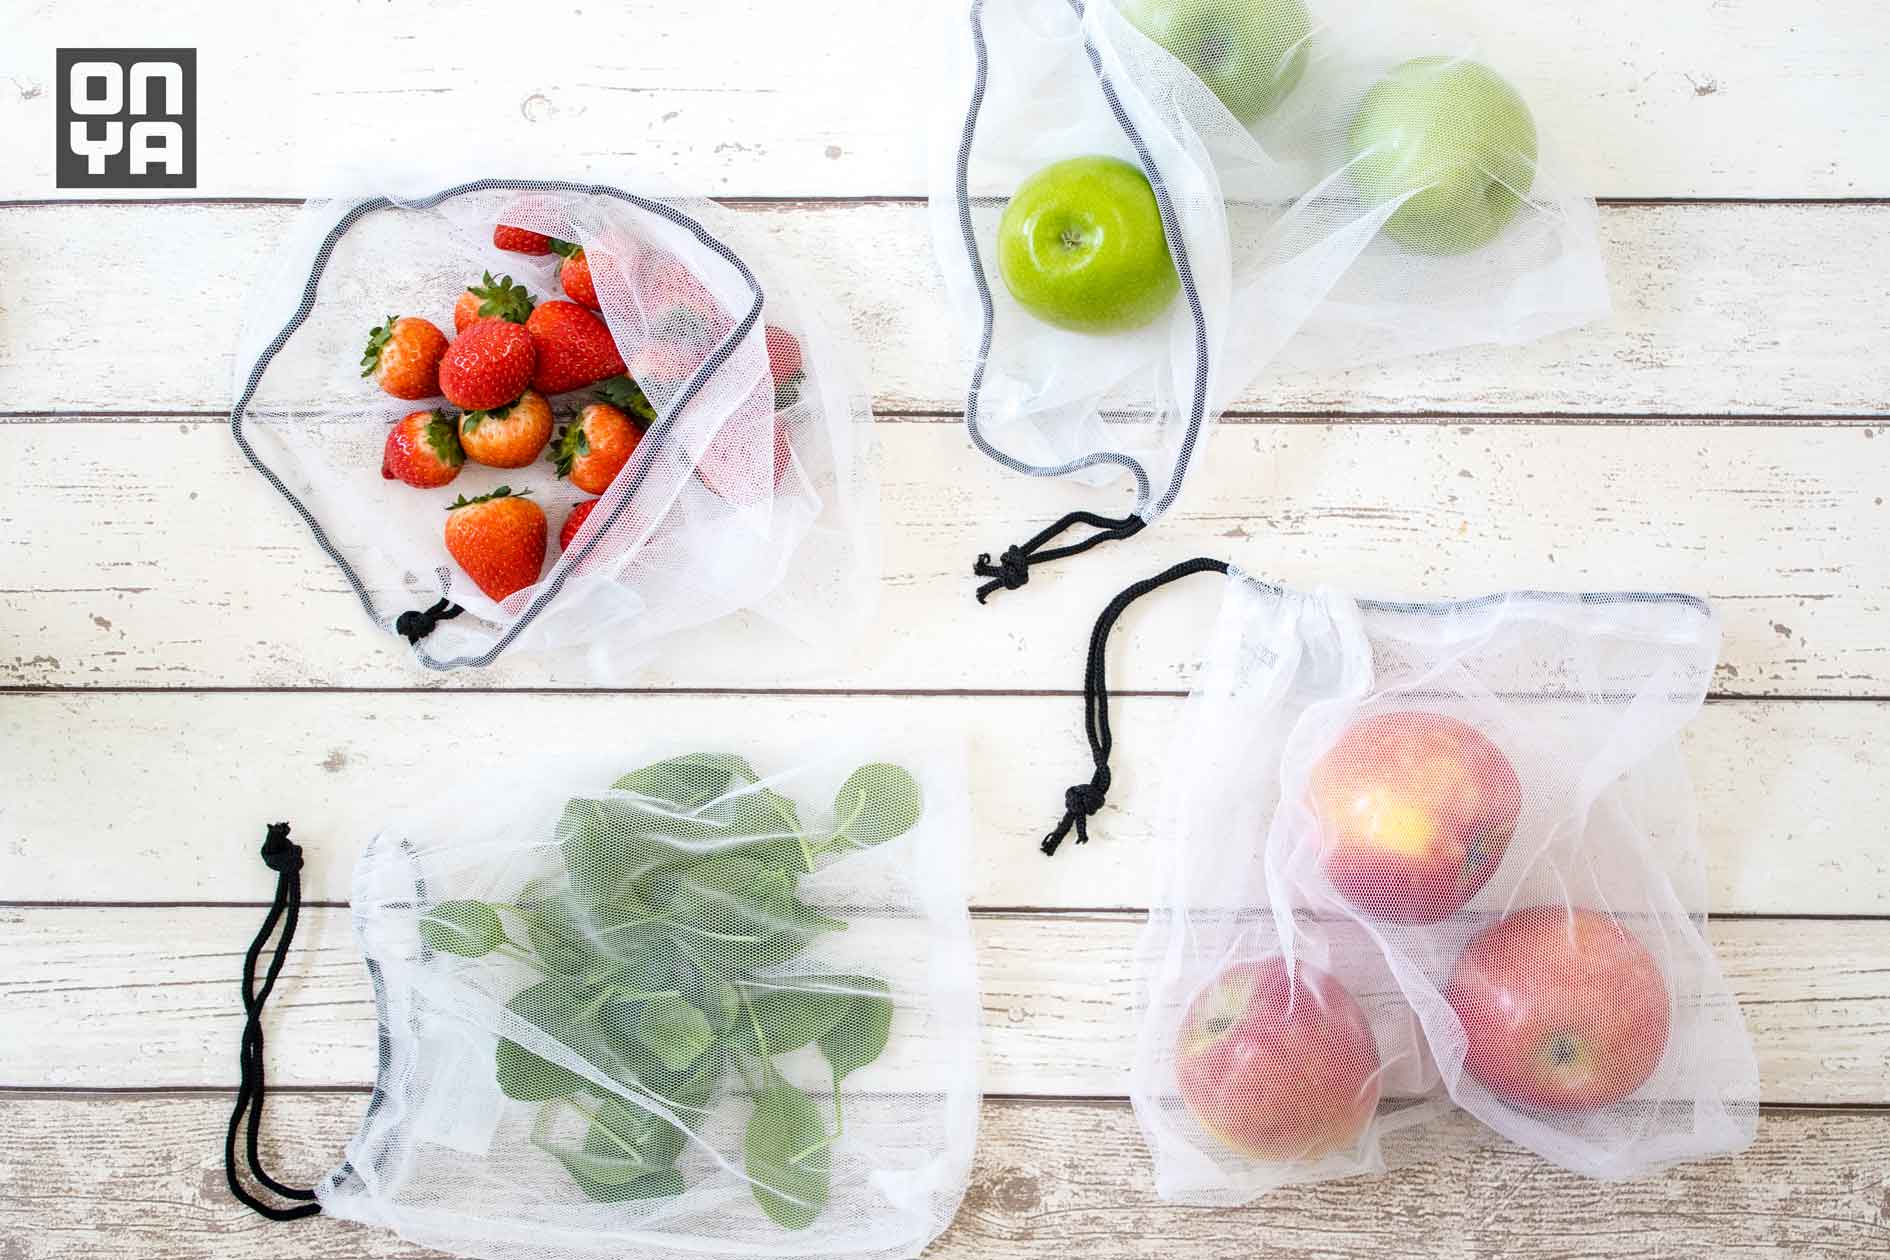 Onya Reusable Produce Bags - 8 Pack: Sustainable Shopping Made Easy and Stylish